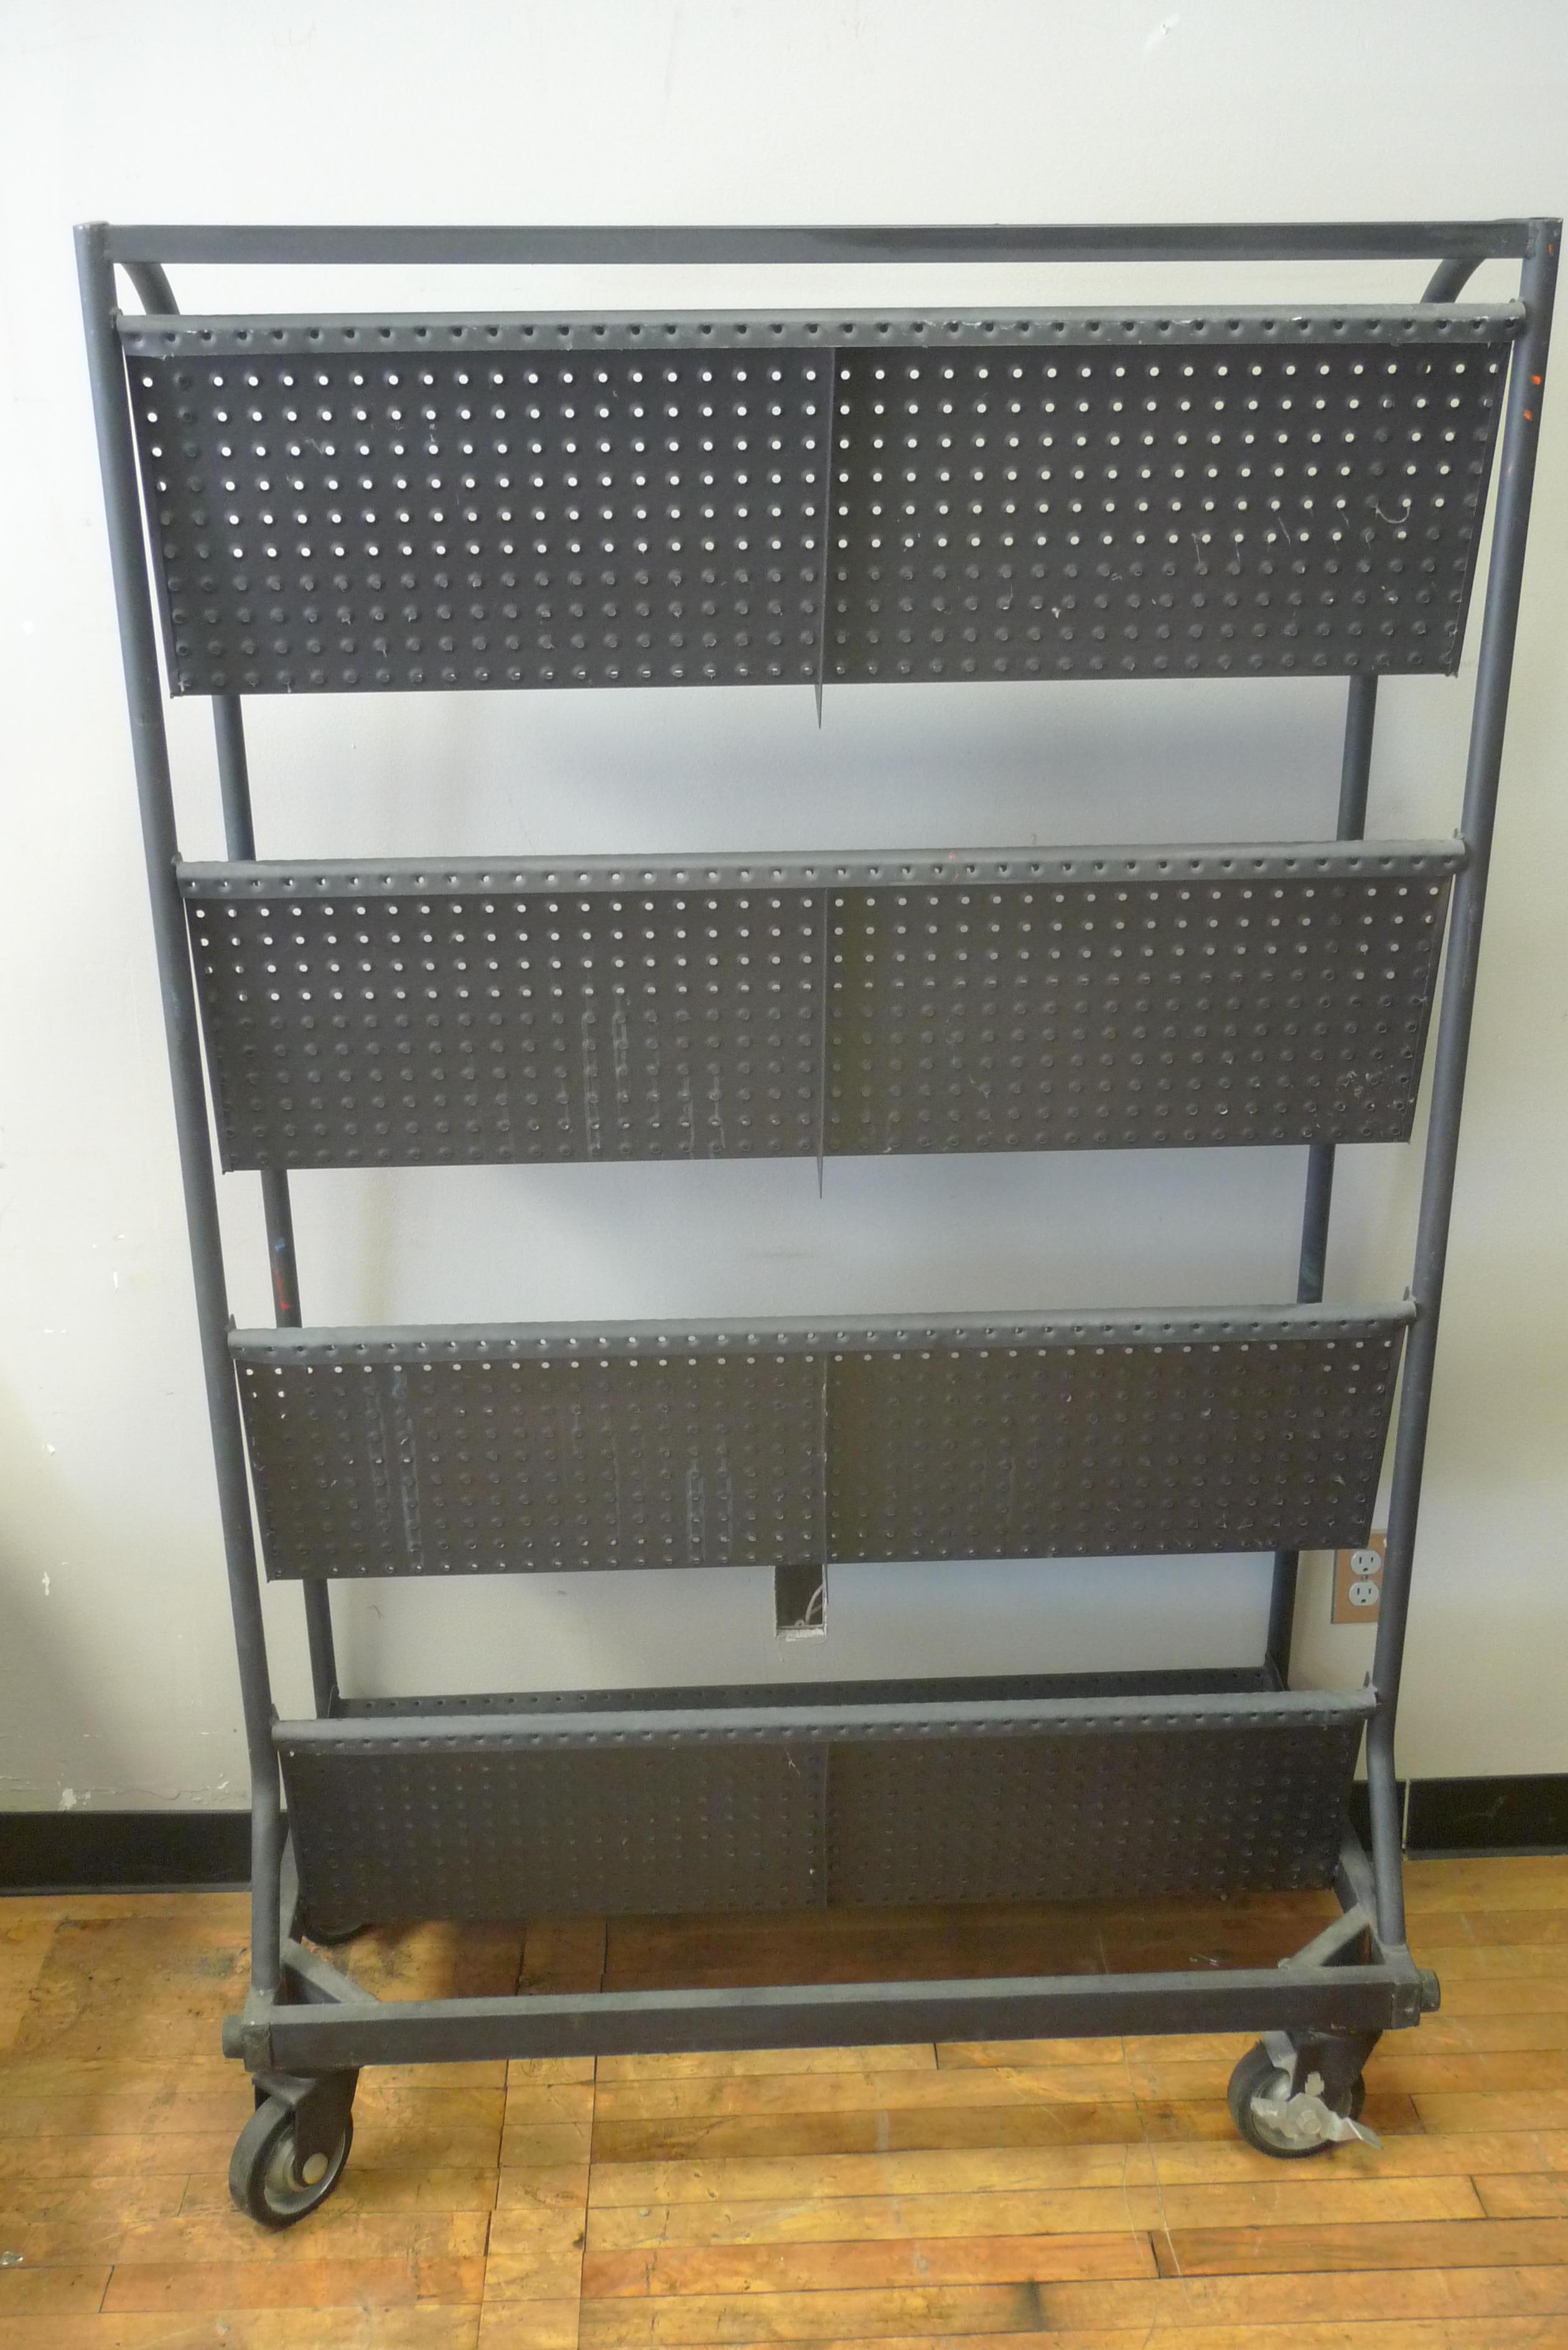 Late 20th Century Industrial Shelving Unit on Wheels with Perforated, Black-Painted Steel Shelves